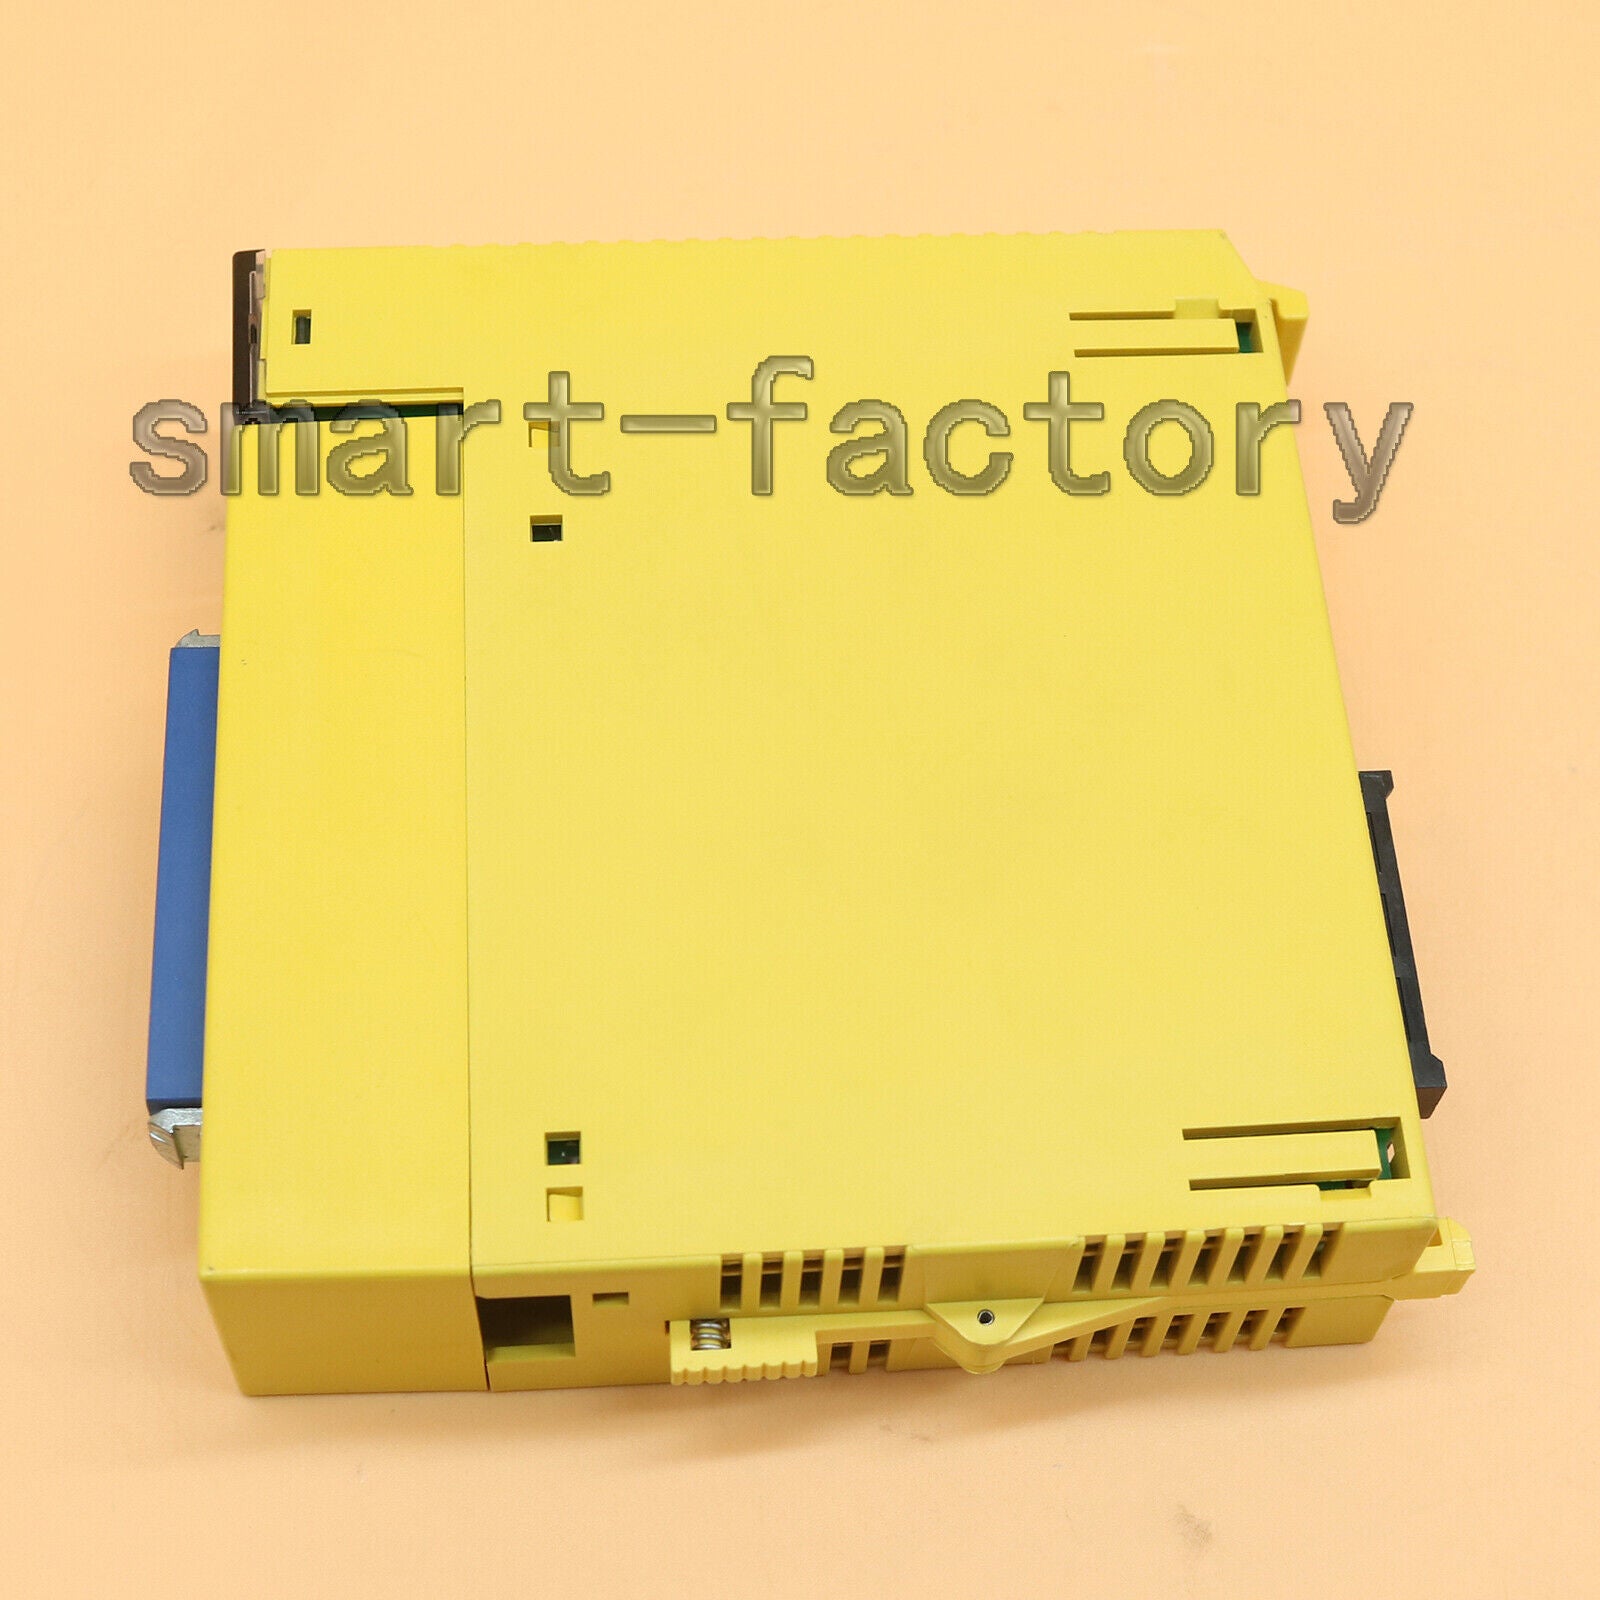 used One  Fanuc A03B-0807-C105 IO Interface Module Tested in Good Condition